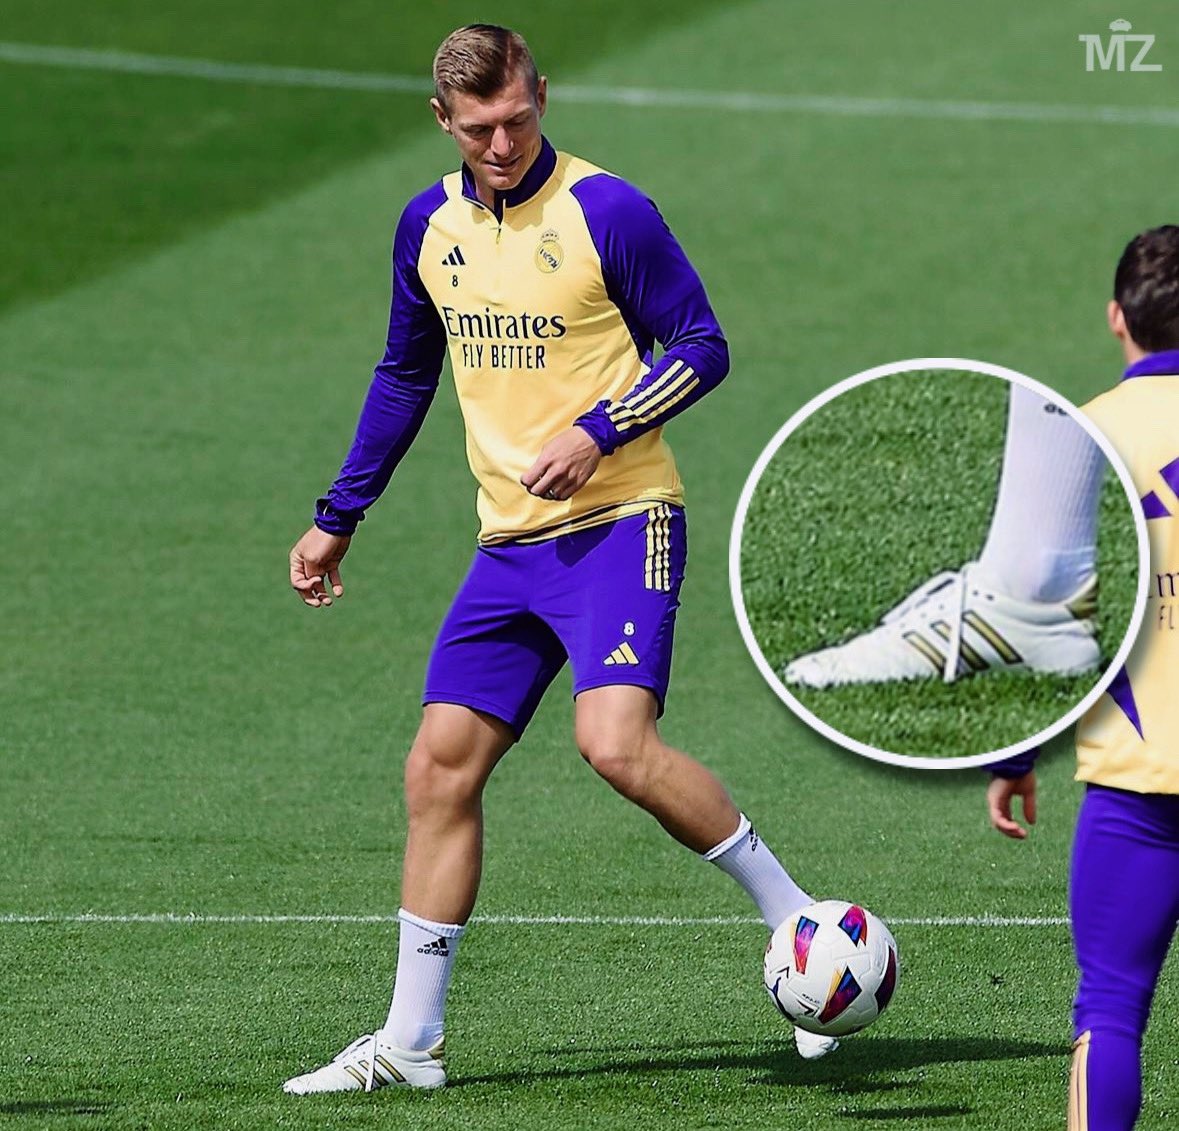 Toni Kroos training in the ‘Gold’ version of his Adidas boots today. ⚜️✨